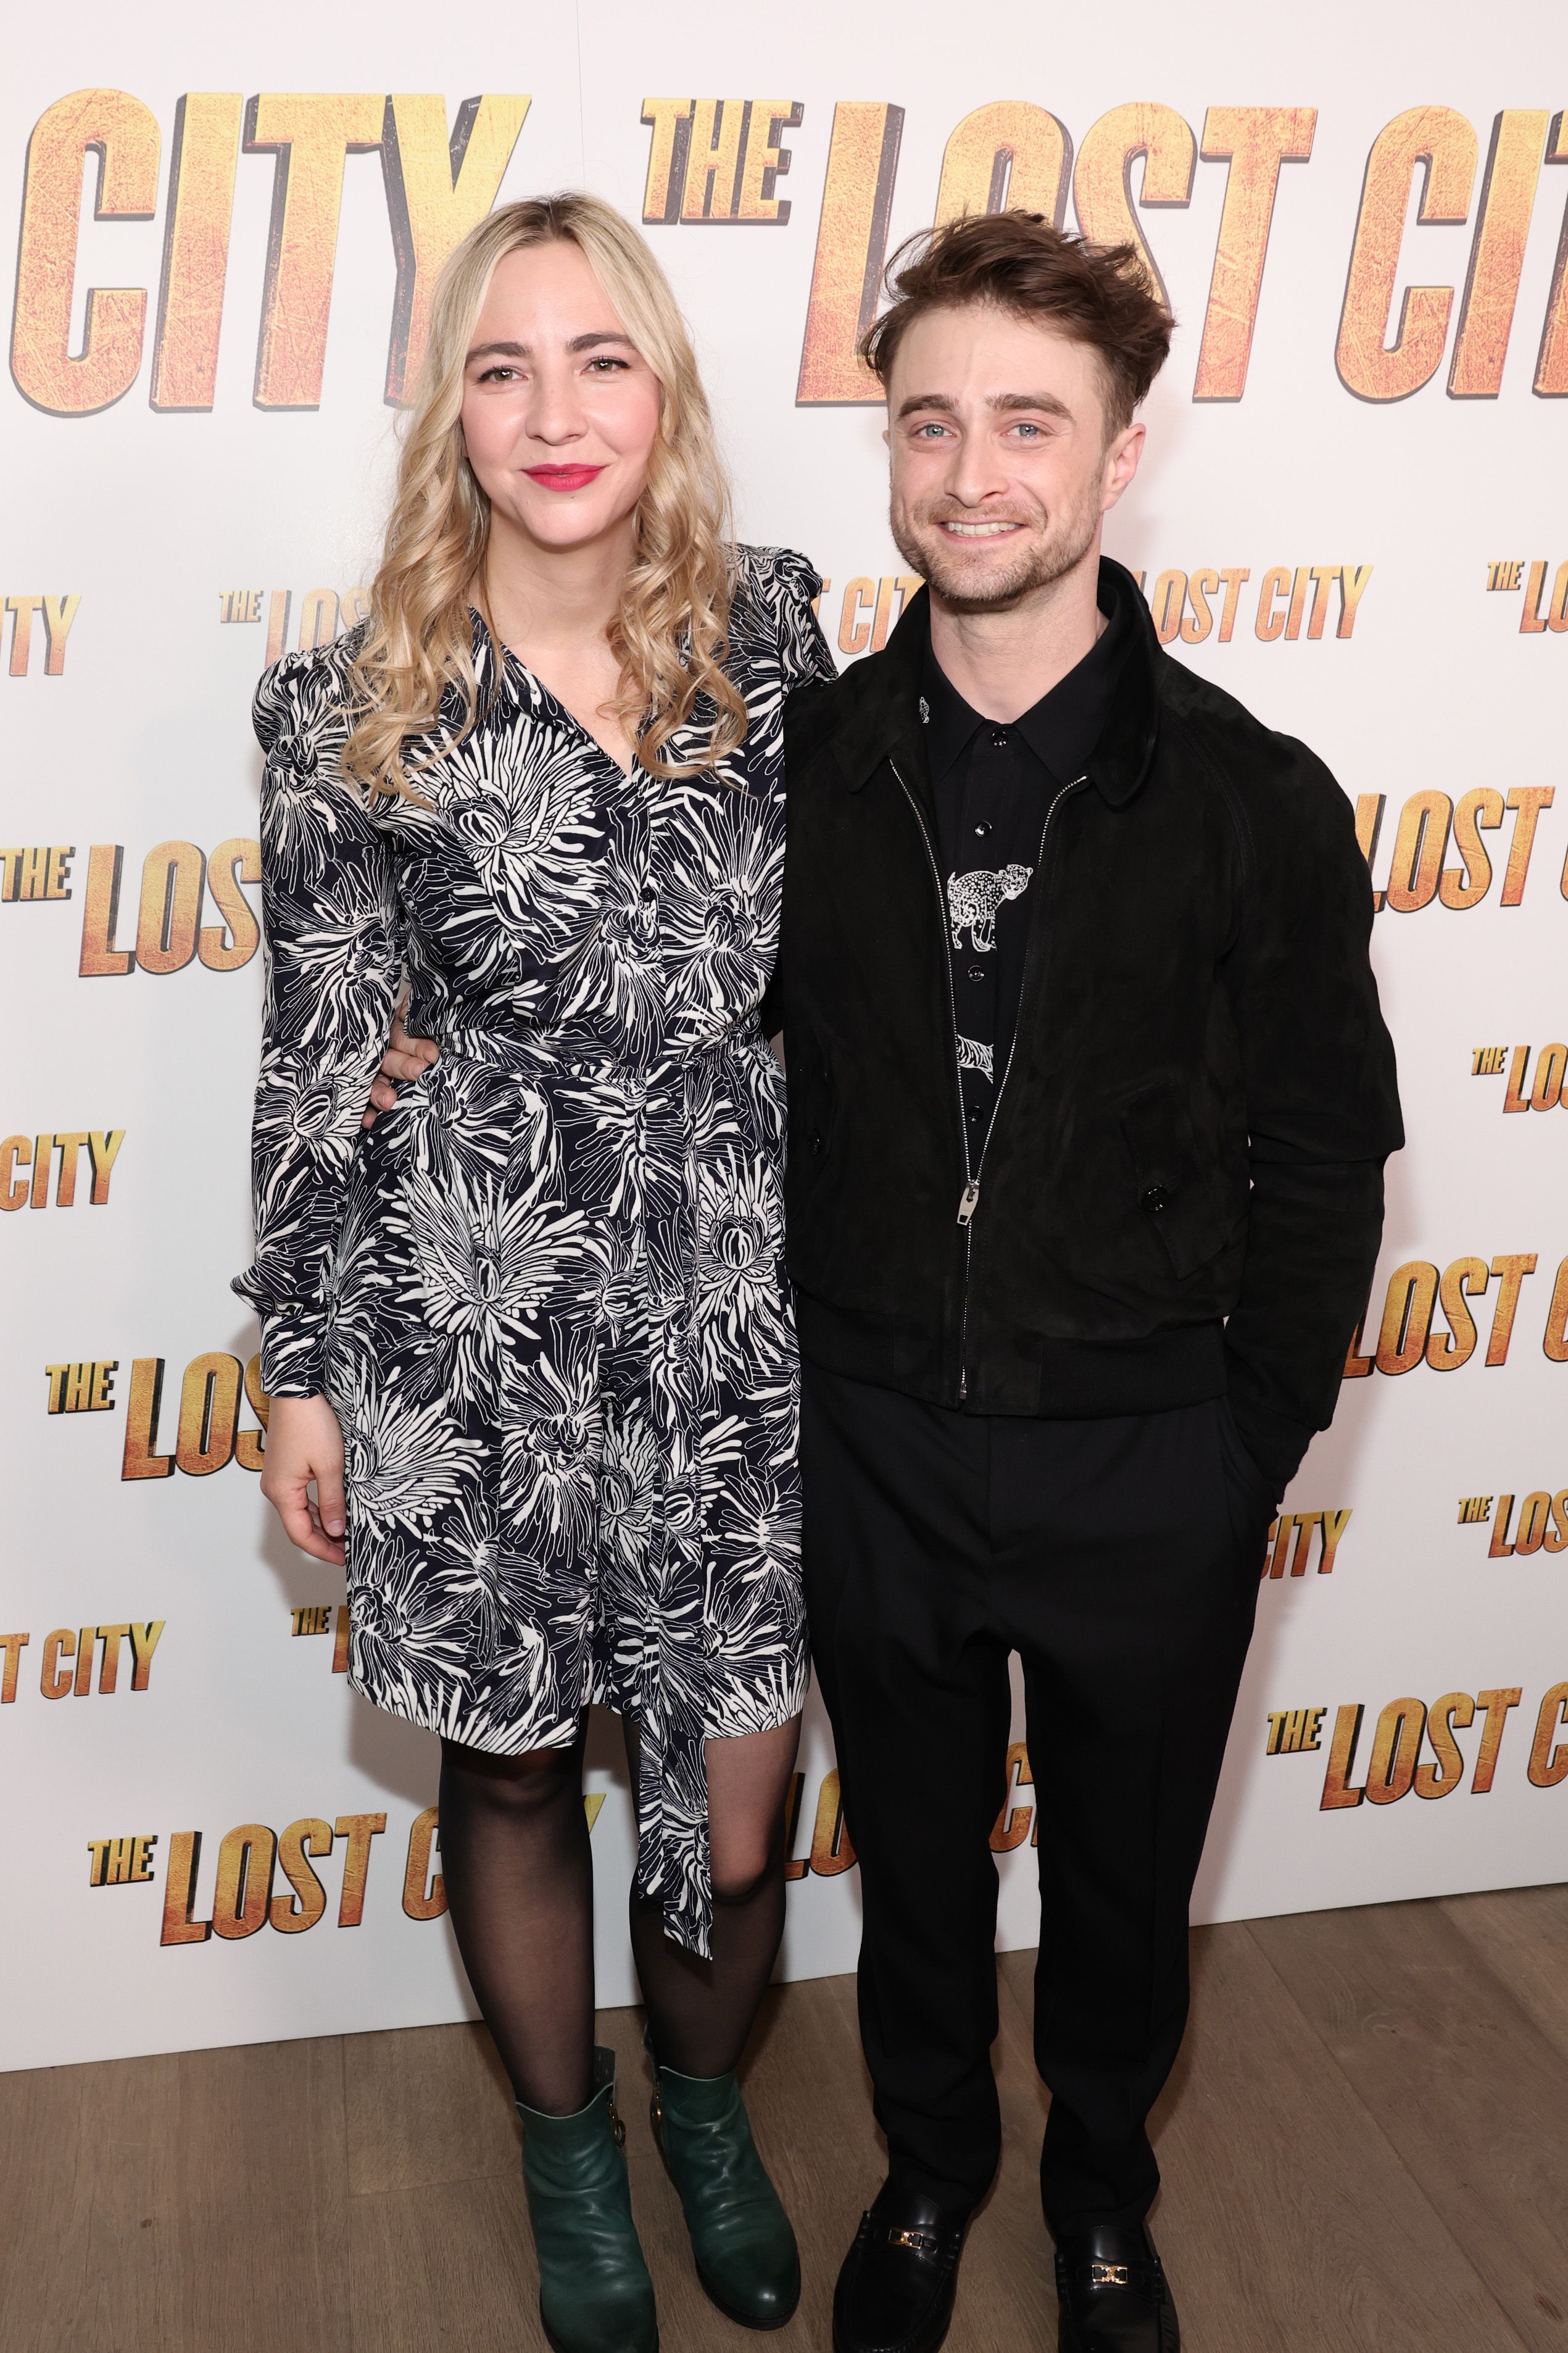 erin-darke-and-daniel-radcliffe-attend-a-screening-of-the-news-photo-1674589165.jpg (1.24 MB)